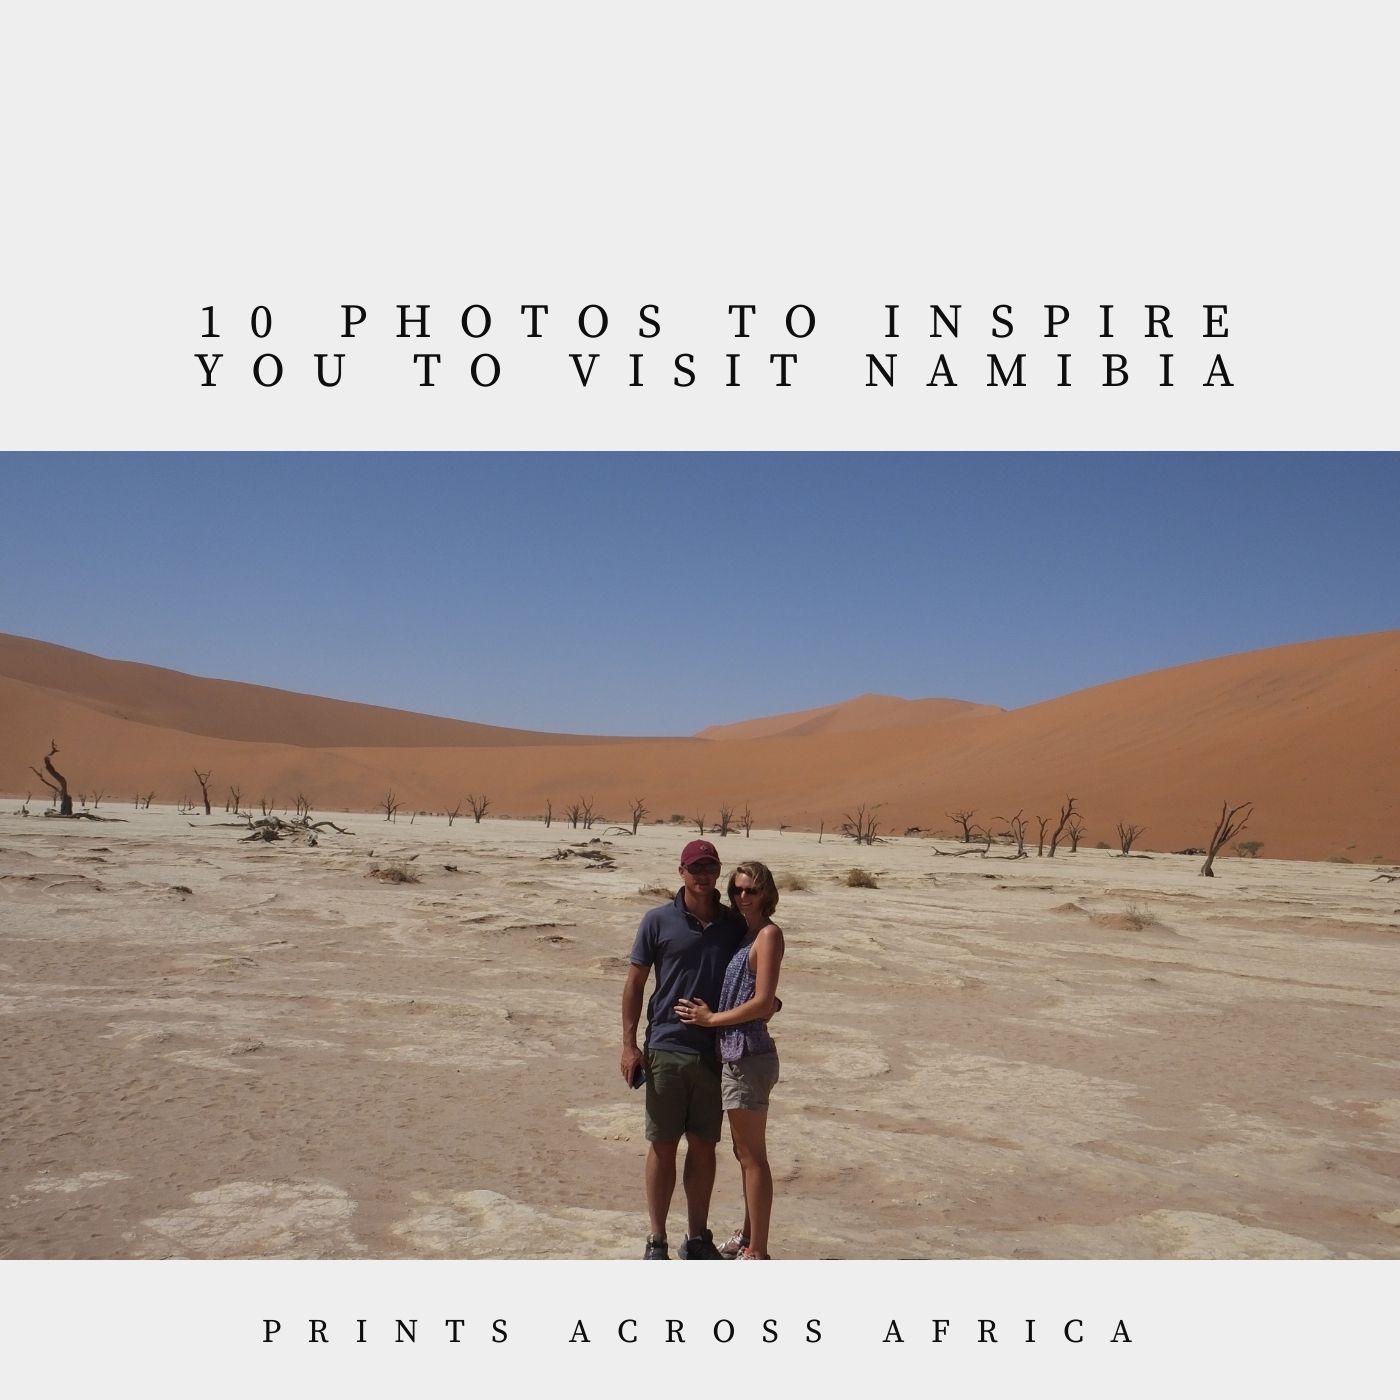 10 photos to inspire you to visit Namibia